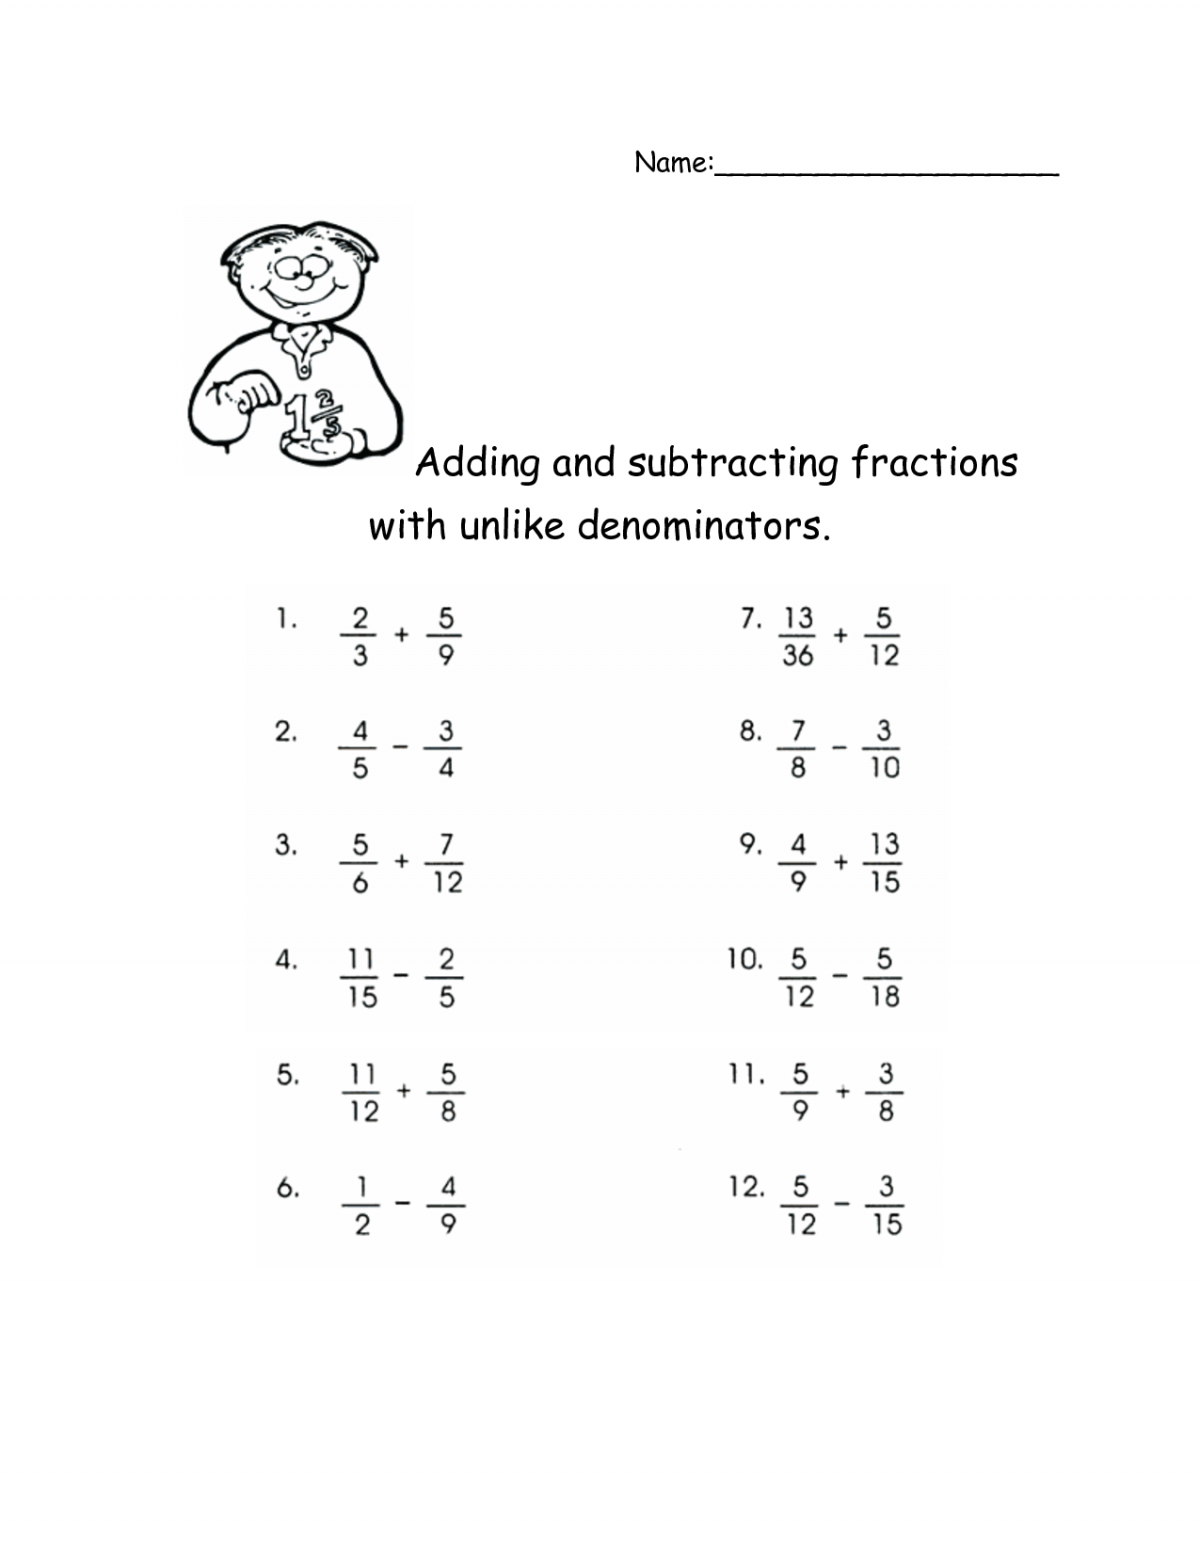 add-and-subtract-fractions-with-unlike-denominators-free-worksheet